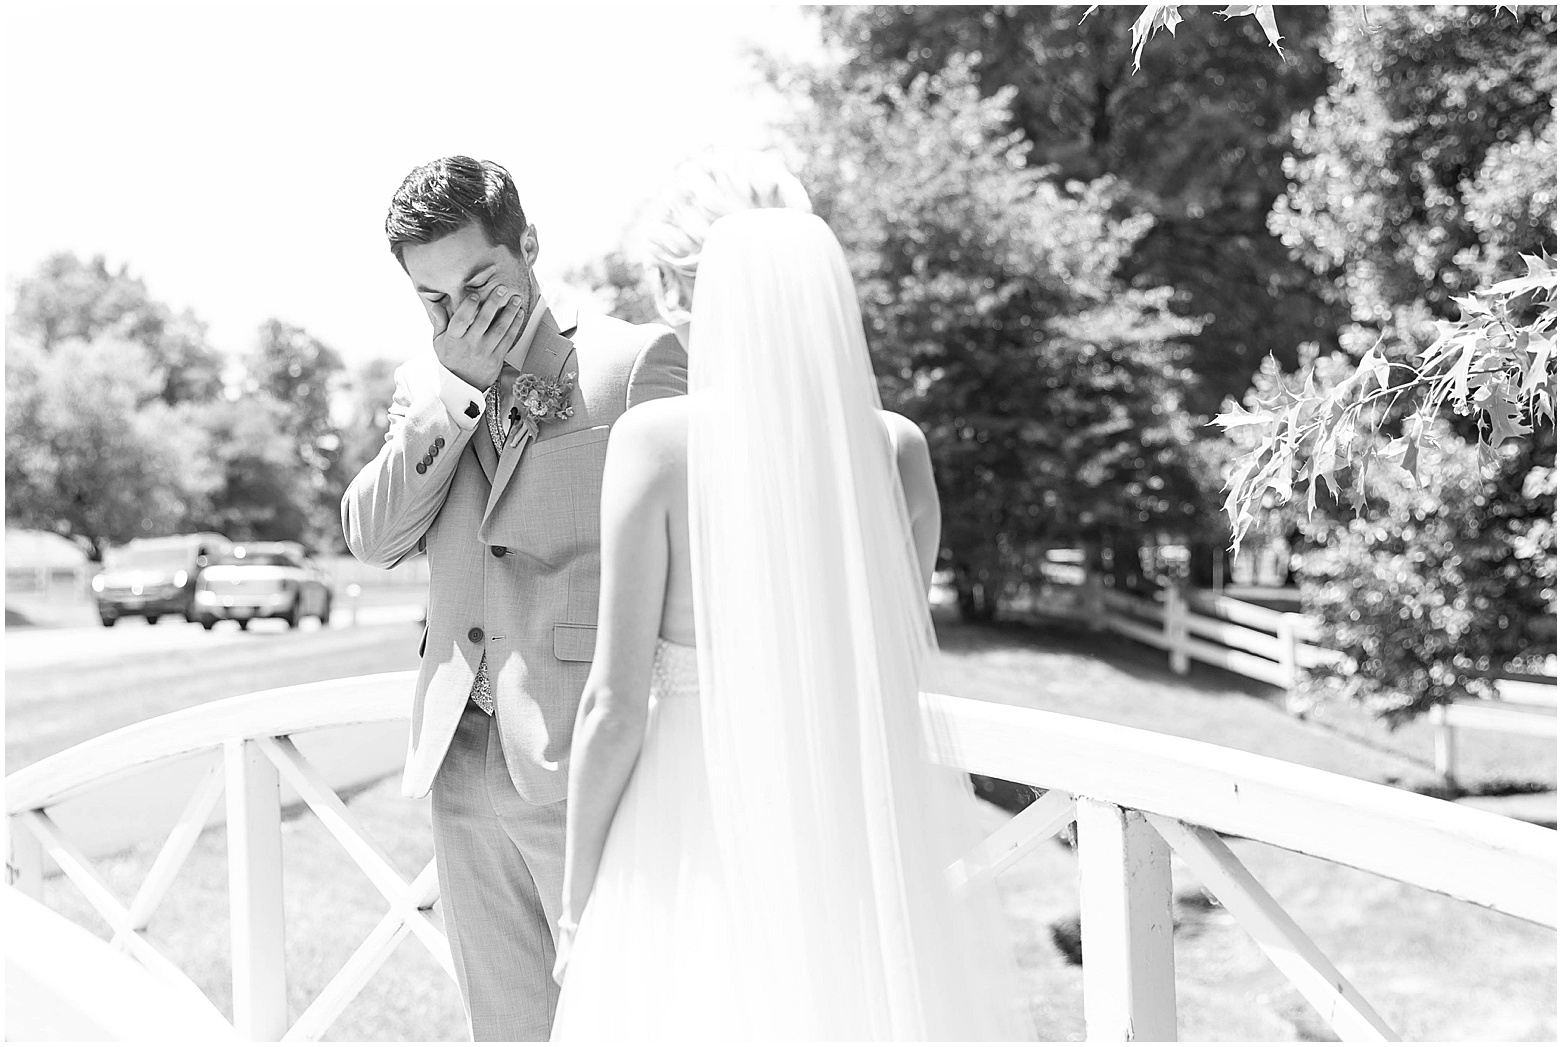 View More: http://hopetaylorphotographyphotos.pass.us/susie-and-darren